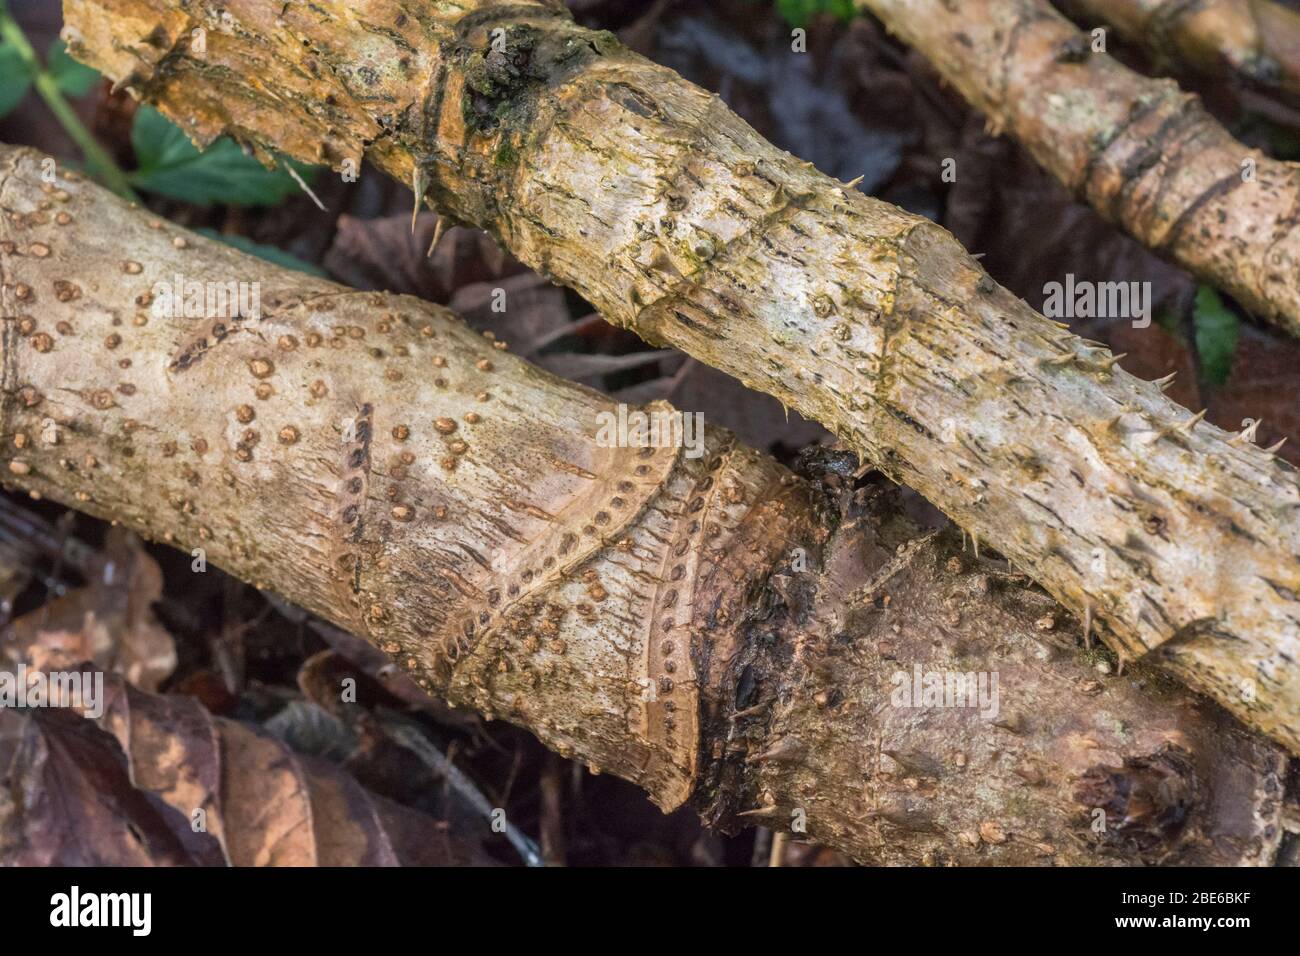 Cut spiny stems of Aralia /  Devil's Walking Stick. Either Aralia spinosa or Aralia elata. Abstract spines in nature, sharp thorns, plant defences. Stock Photo